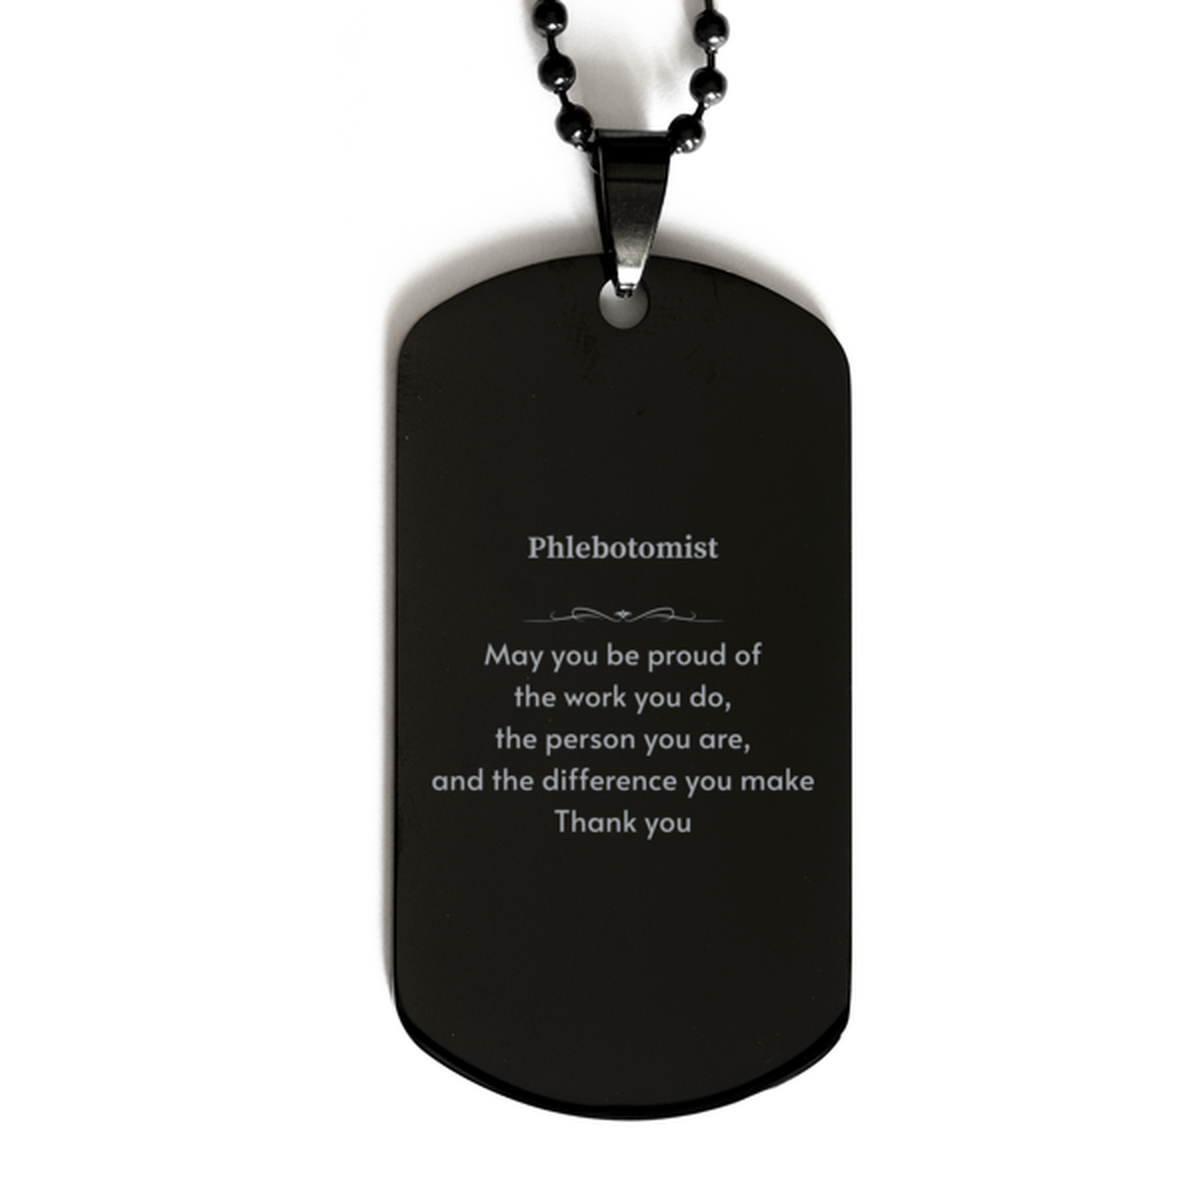 Heartwarming Black Dog Tag Retirement Coworkers Gifts for Phlebotomist, Phlebotomist May You be proud of the work you do, the person you are Gifts for Boss Men Women Friends